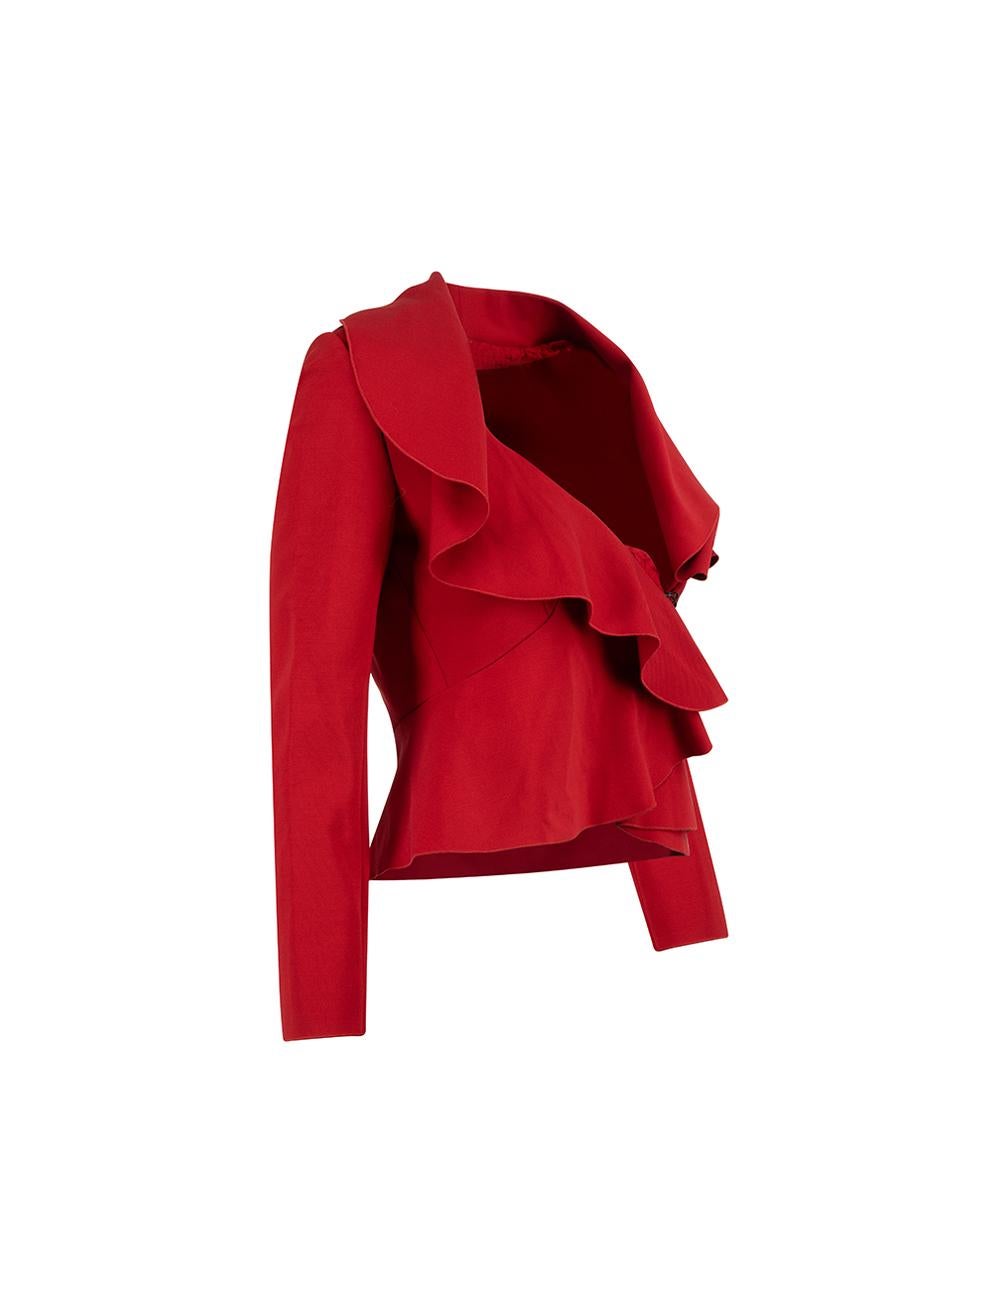 CONDITION is Very good. Minimal wear to jacket is evident. Minor loose thread on front of jacket on this used Valentino Spa designer resale item.
  
Details
Red
Viscose
Blazer jacket
Cropped
Long sleeves
Ruffle lapel
Zip and hook fastening
Peplum